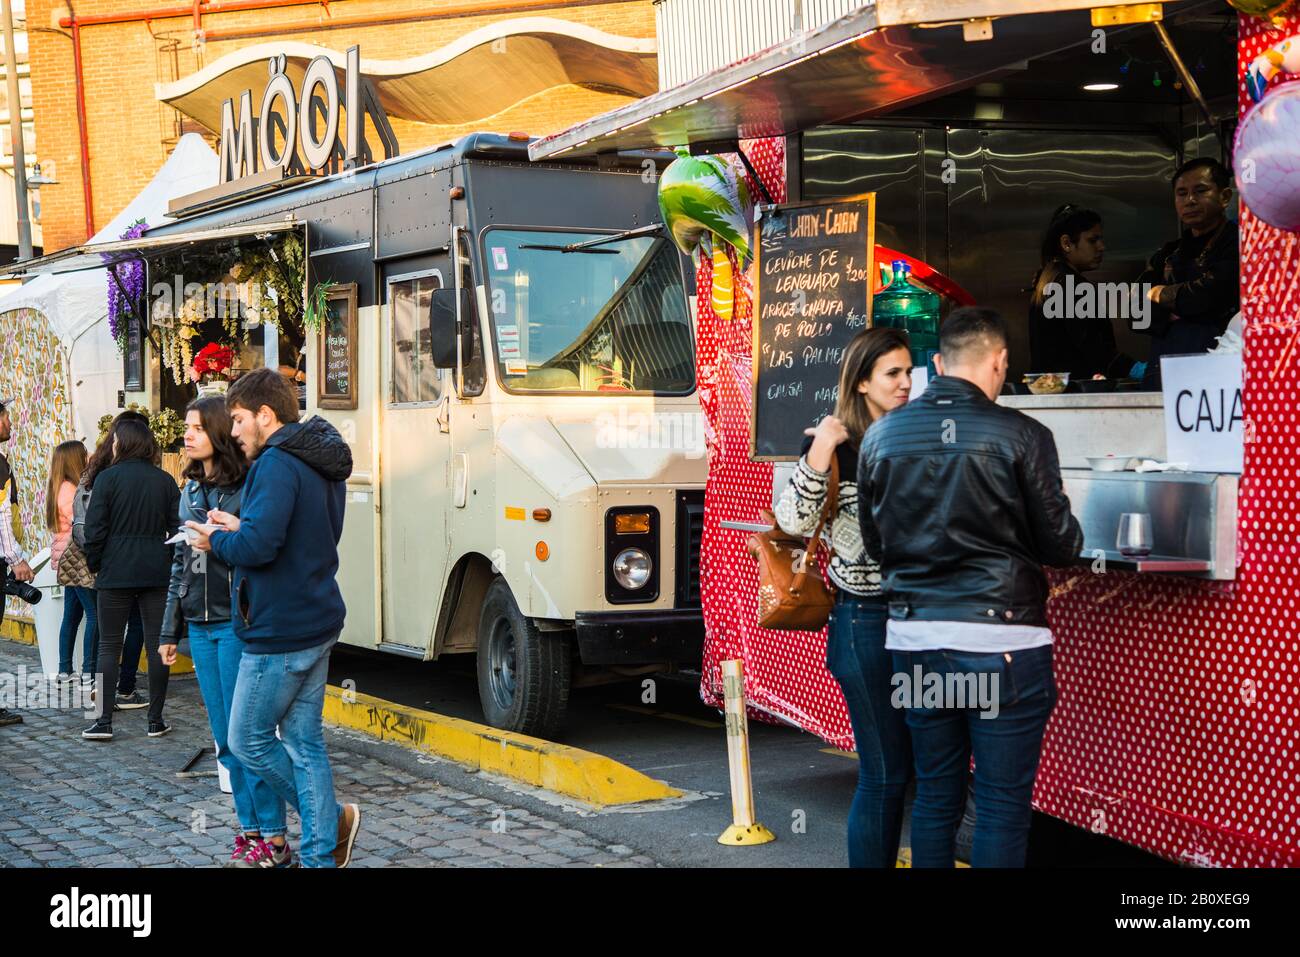 Buenos Aires, Argentina - August 17, 2019: Food trucks at a street food market Stock Photo